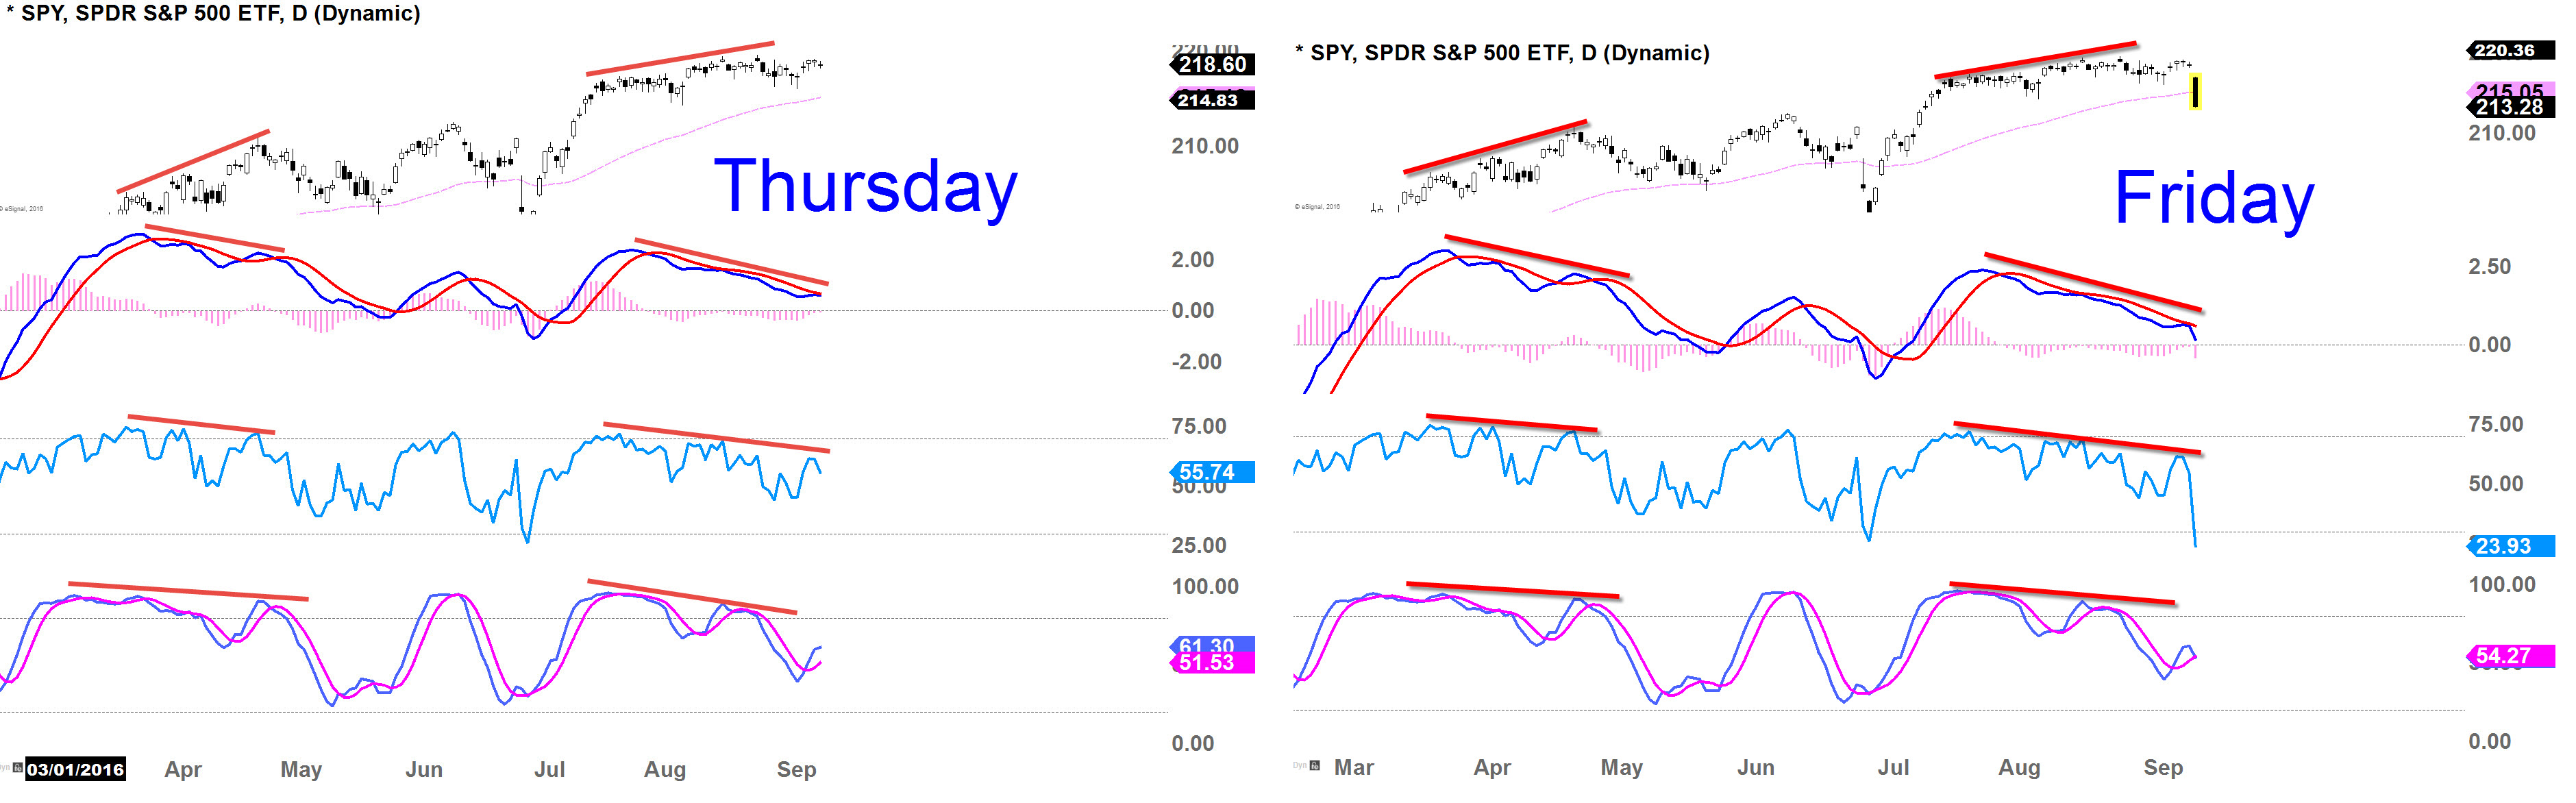 SPY Daily-Chart With the Oscillators 